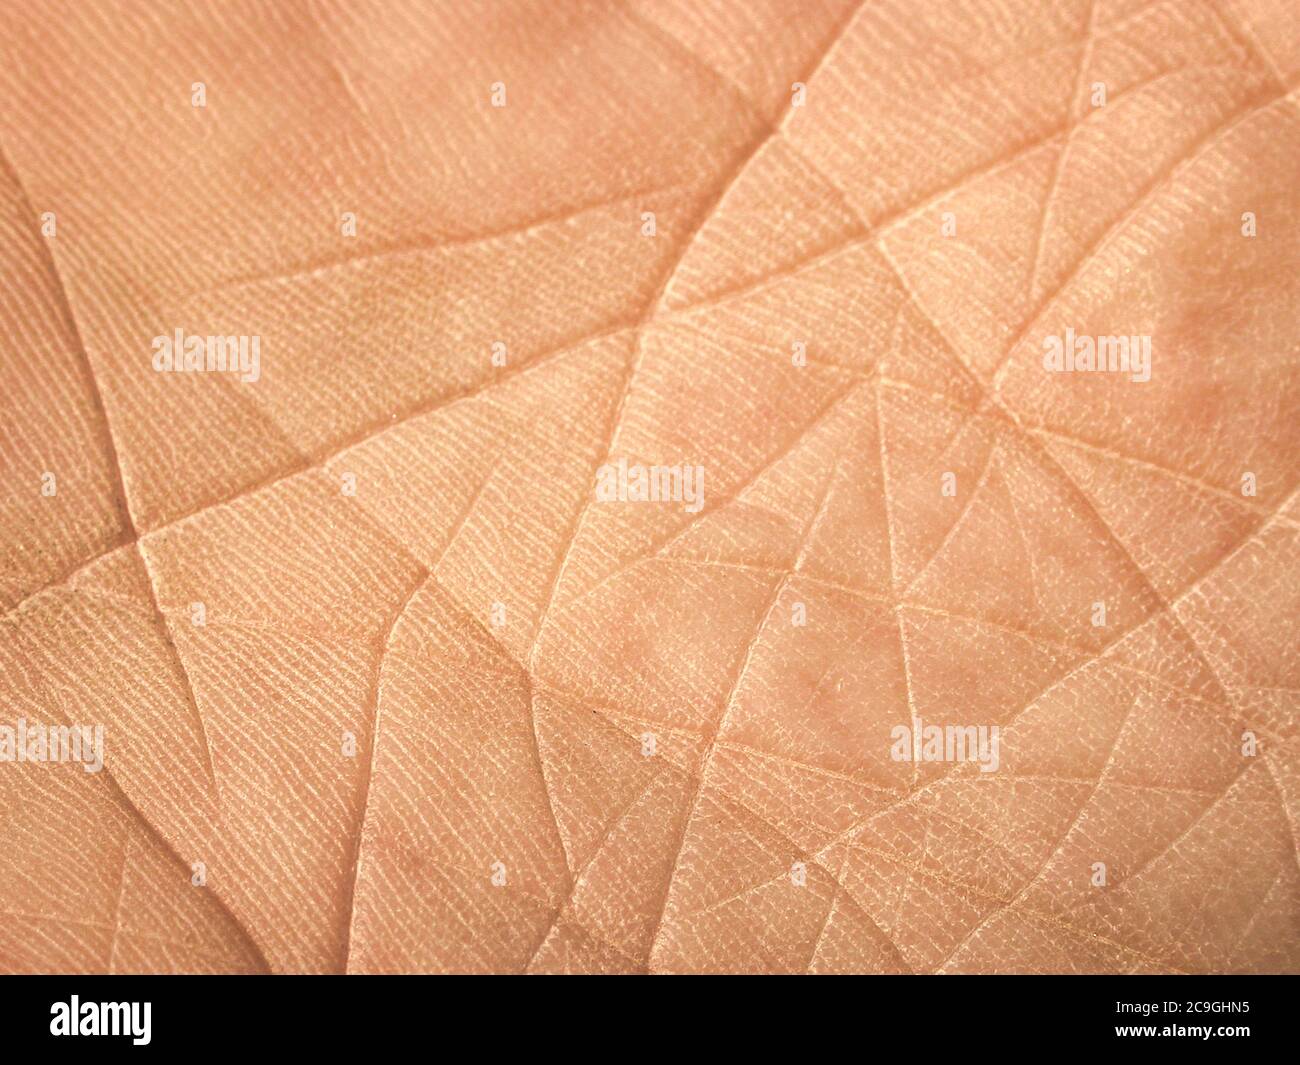 Inner surface, skin, of a human hand with lifelines Stock Photo